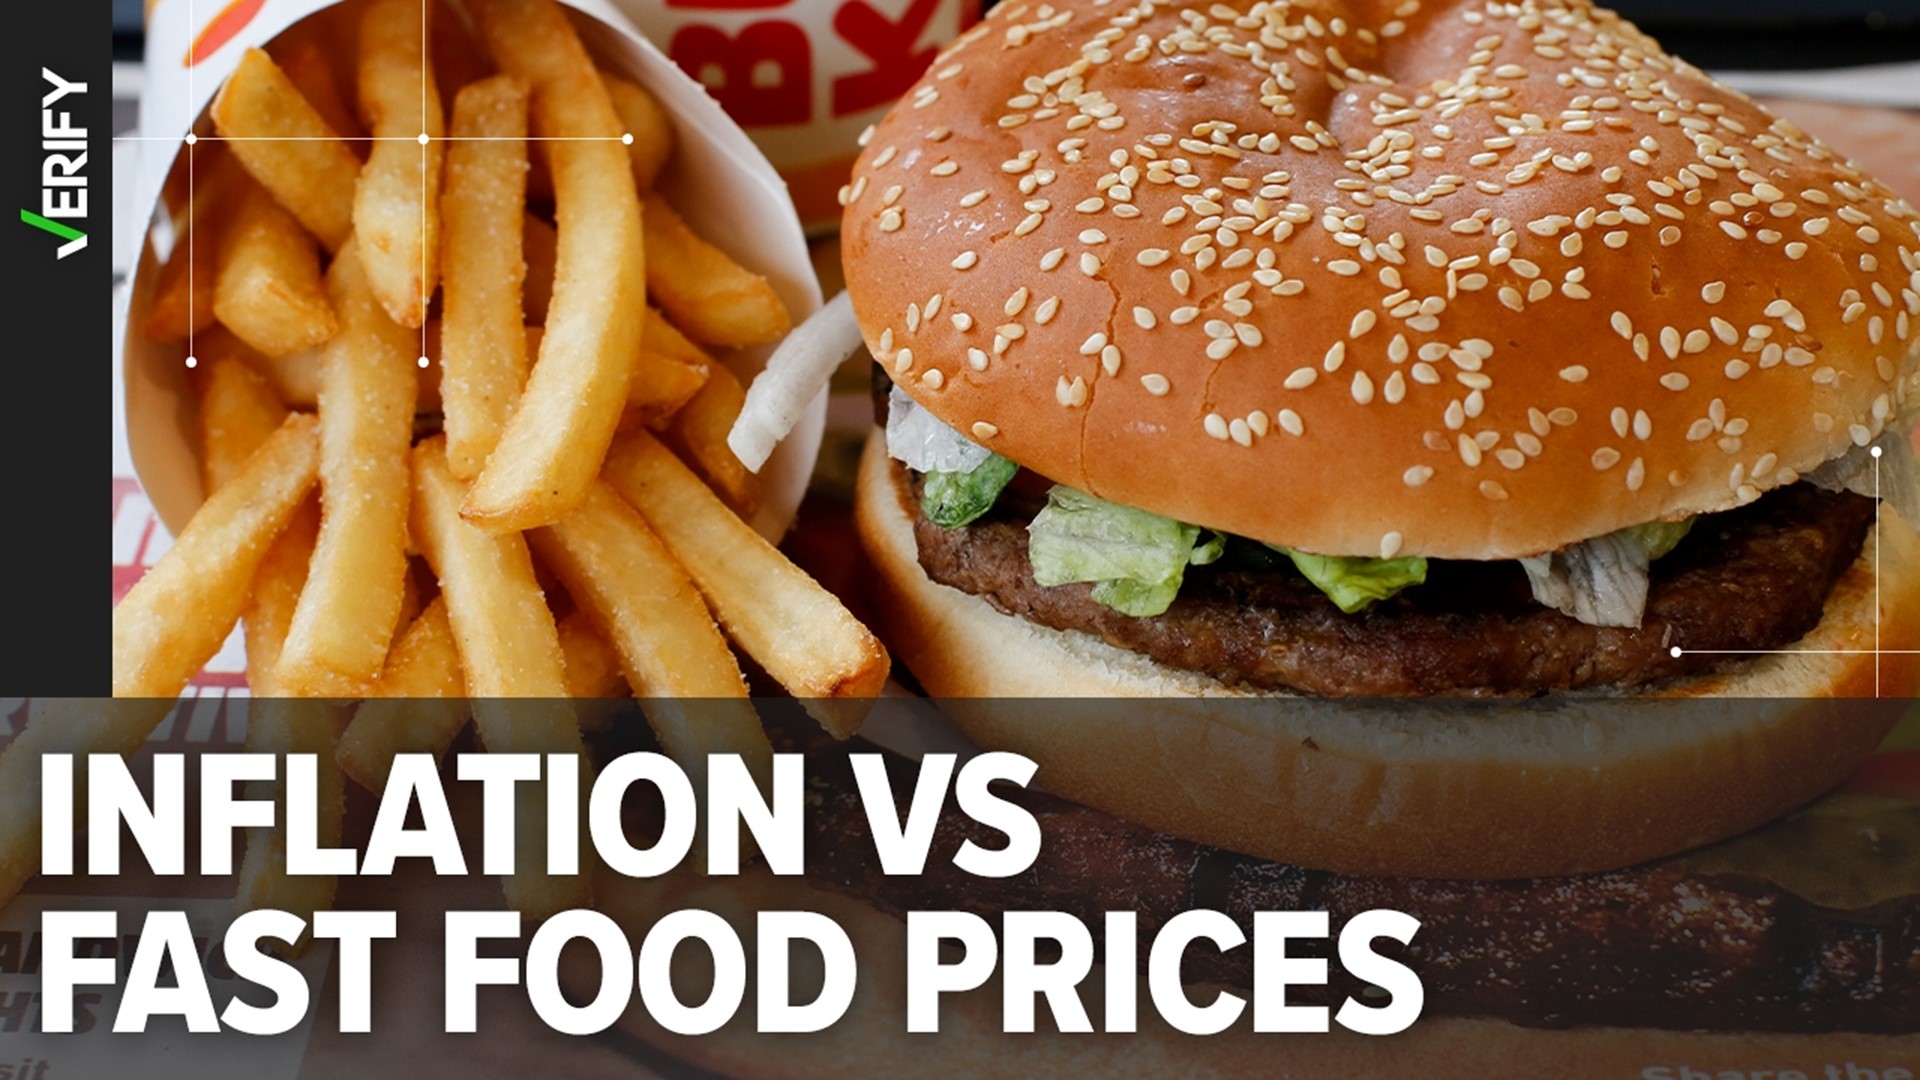 Fast food menu price increases have outpaced inflation